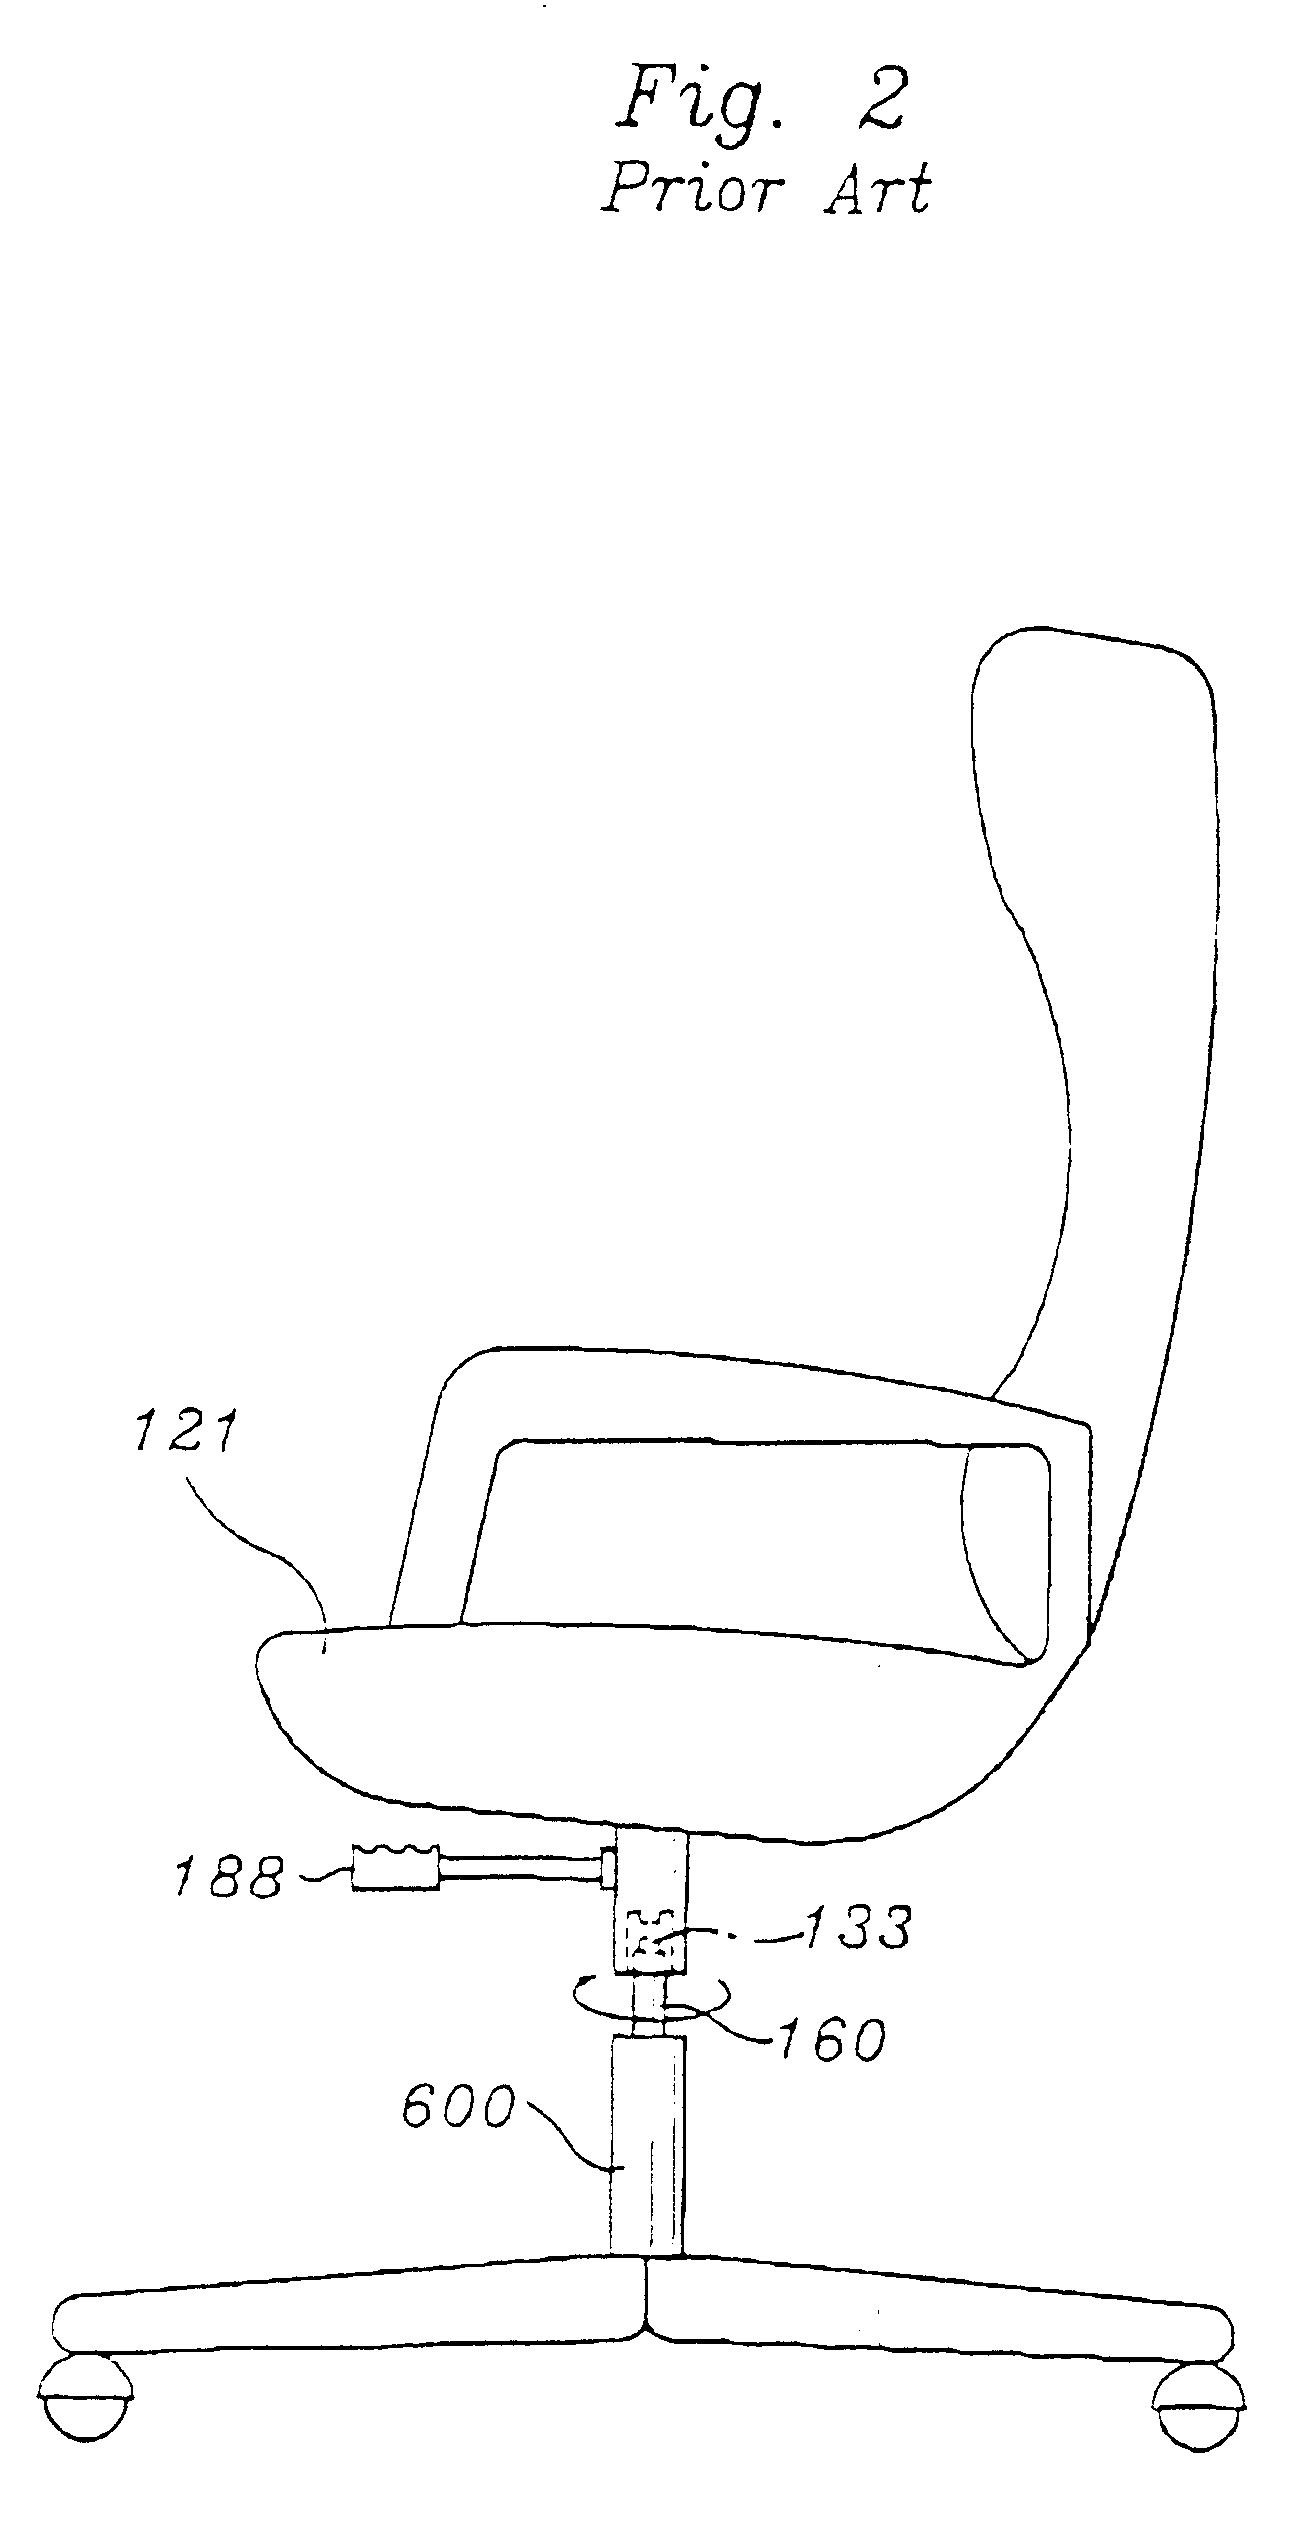 Auto-returning height-control assembly for a chair